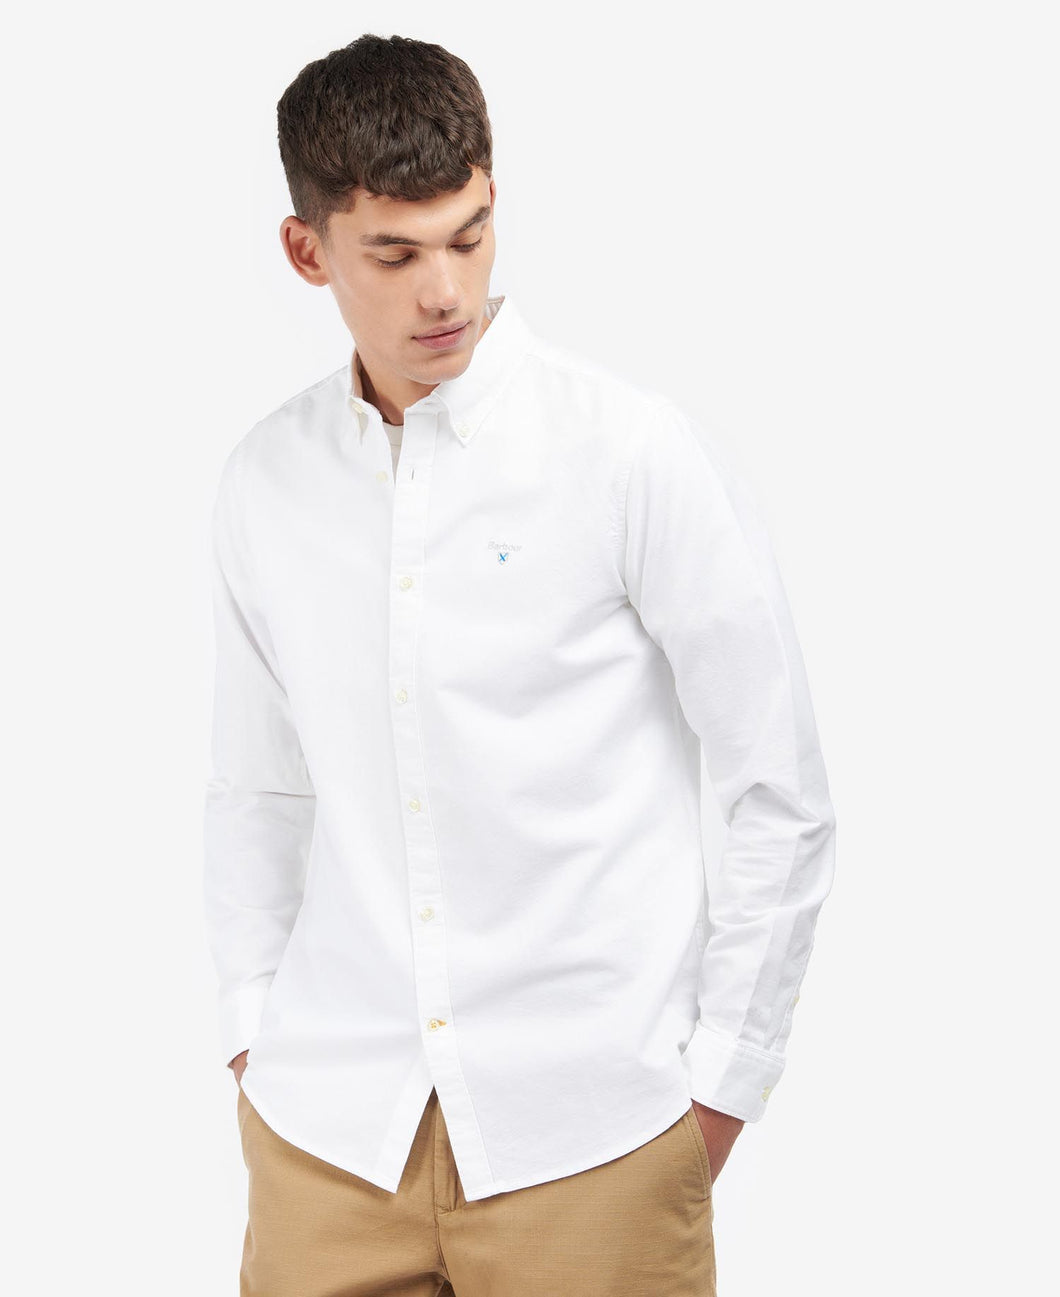 Barbour - Oxtown Tailored Shirt, White